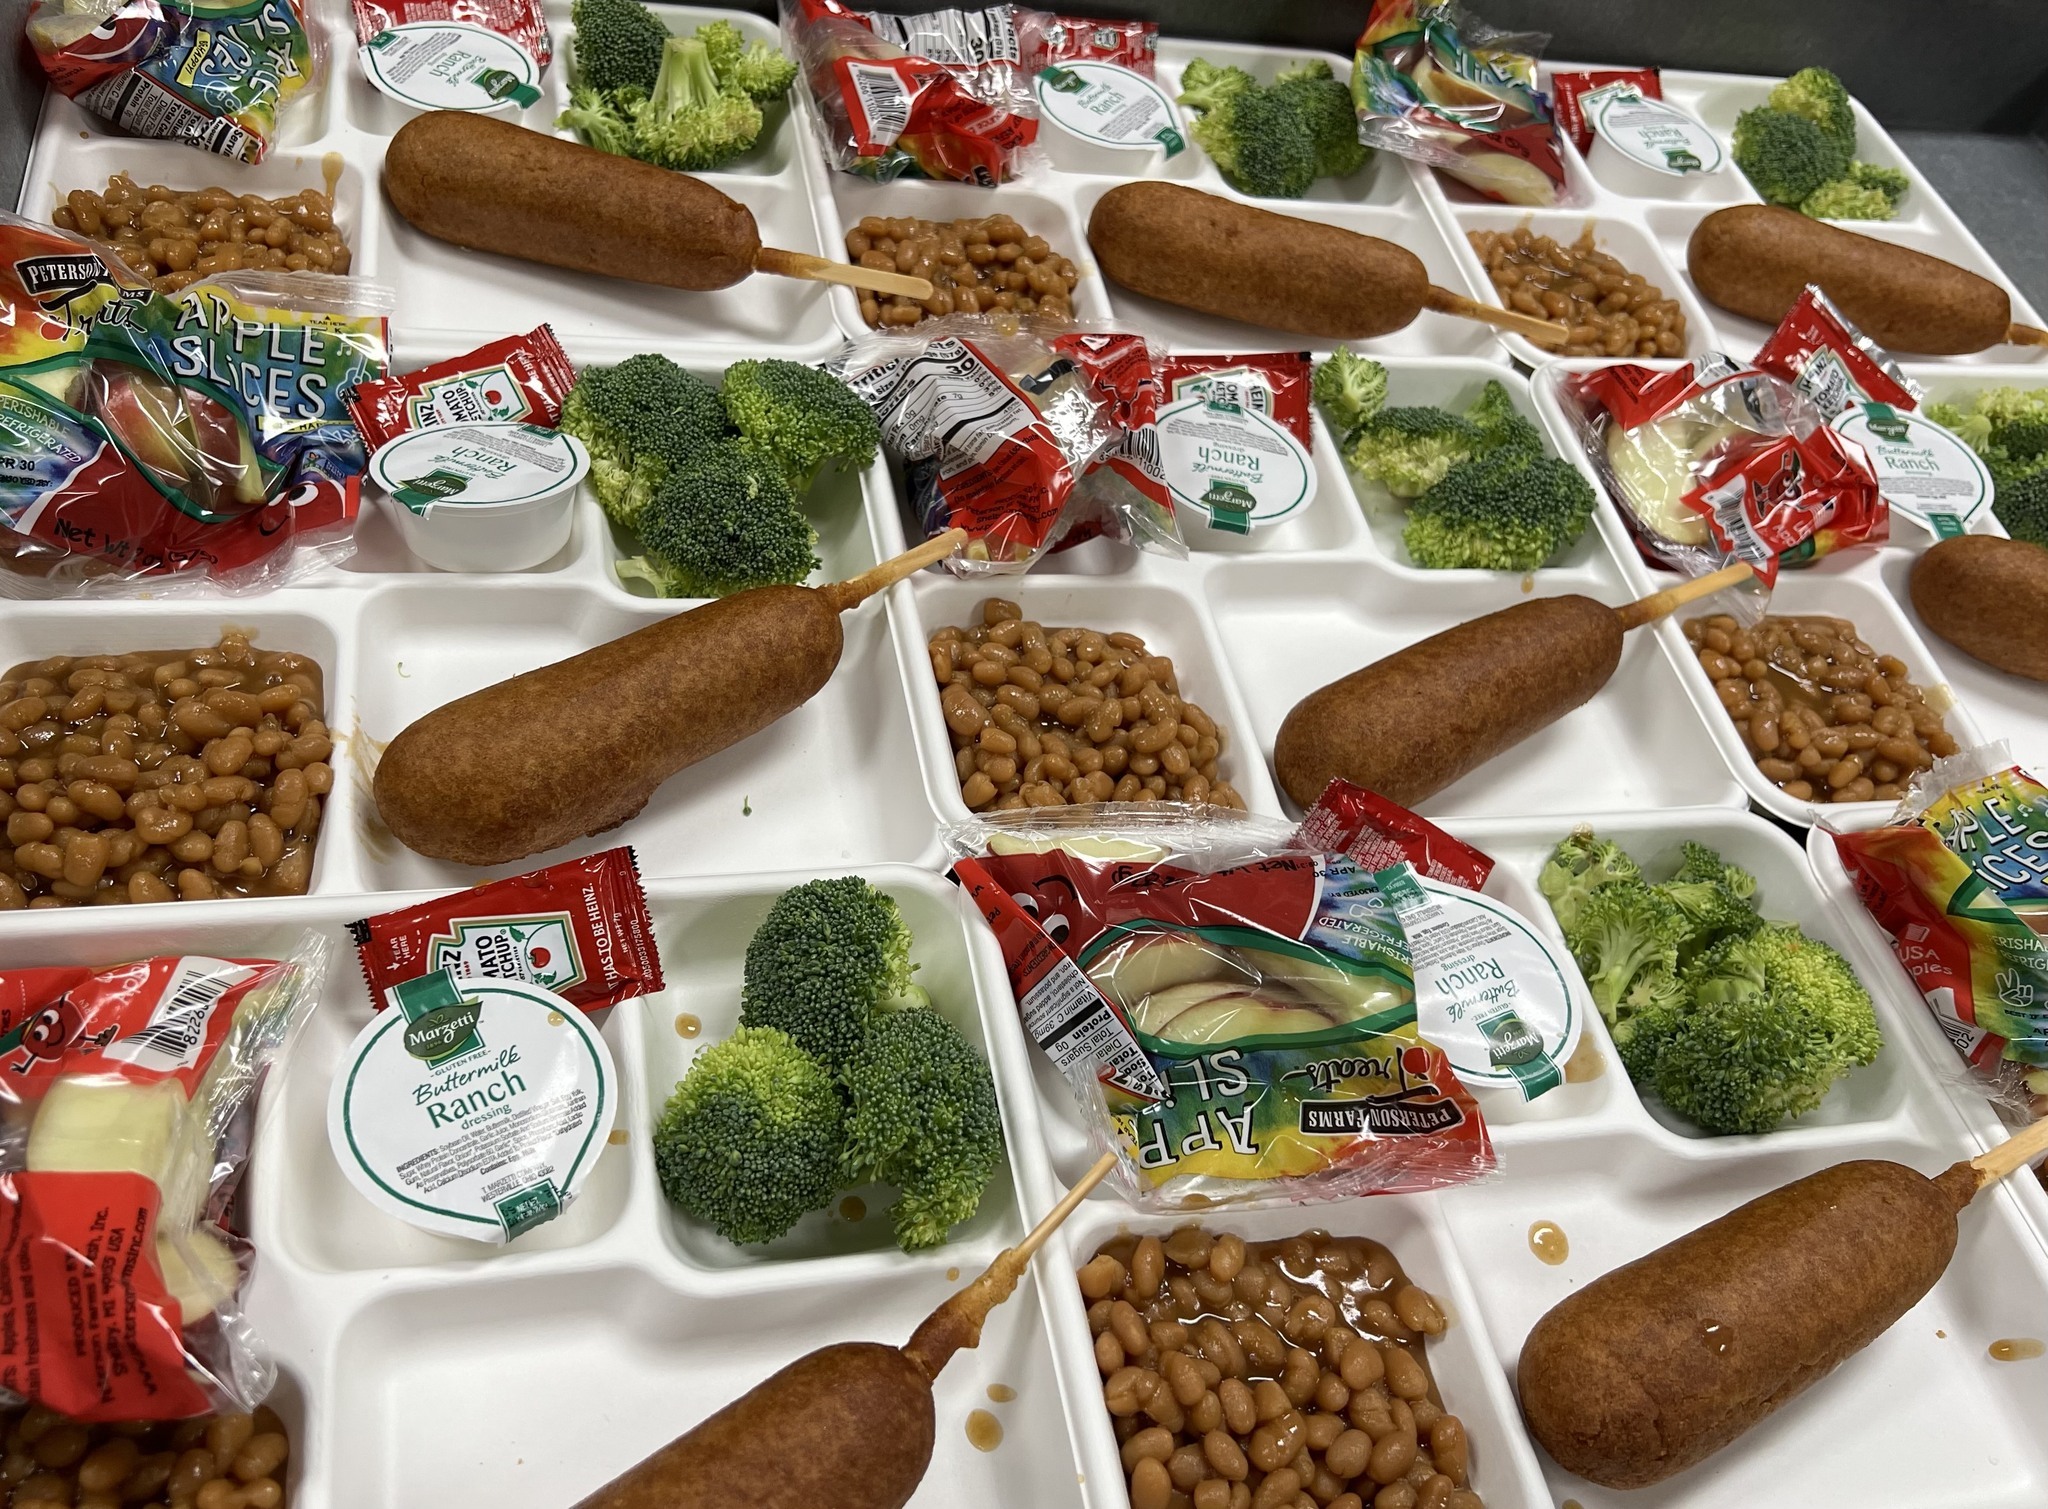 Corn Dogs with baked beans, fruits and veggies. Perfect for a delicious lunch!!